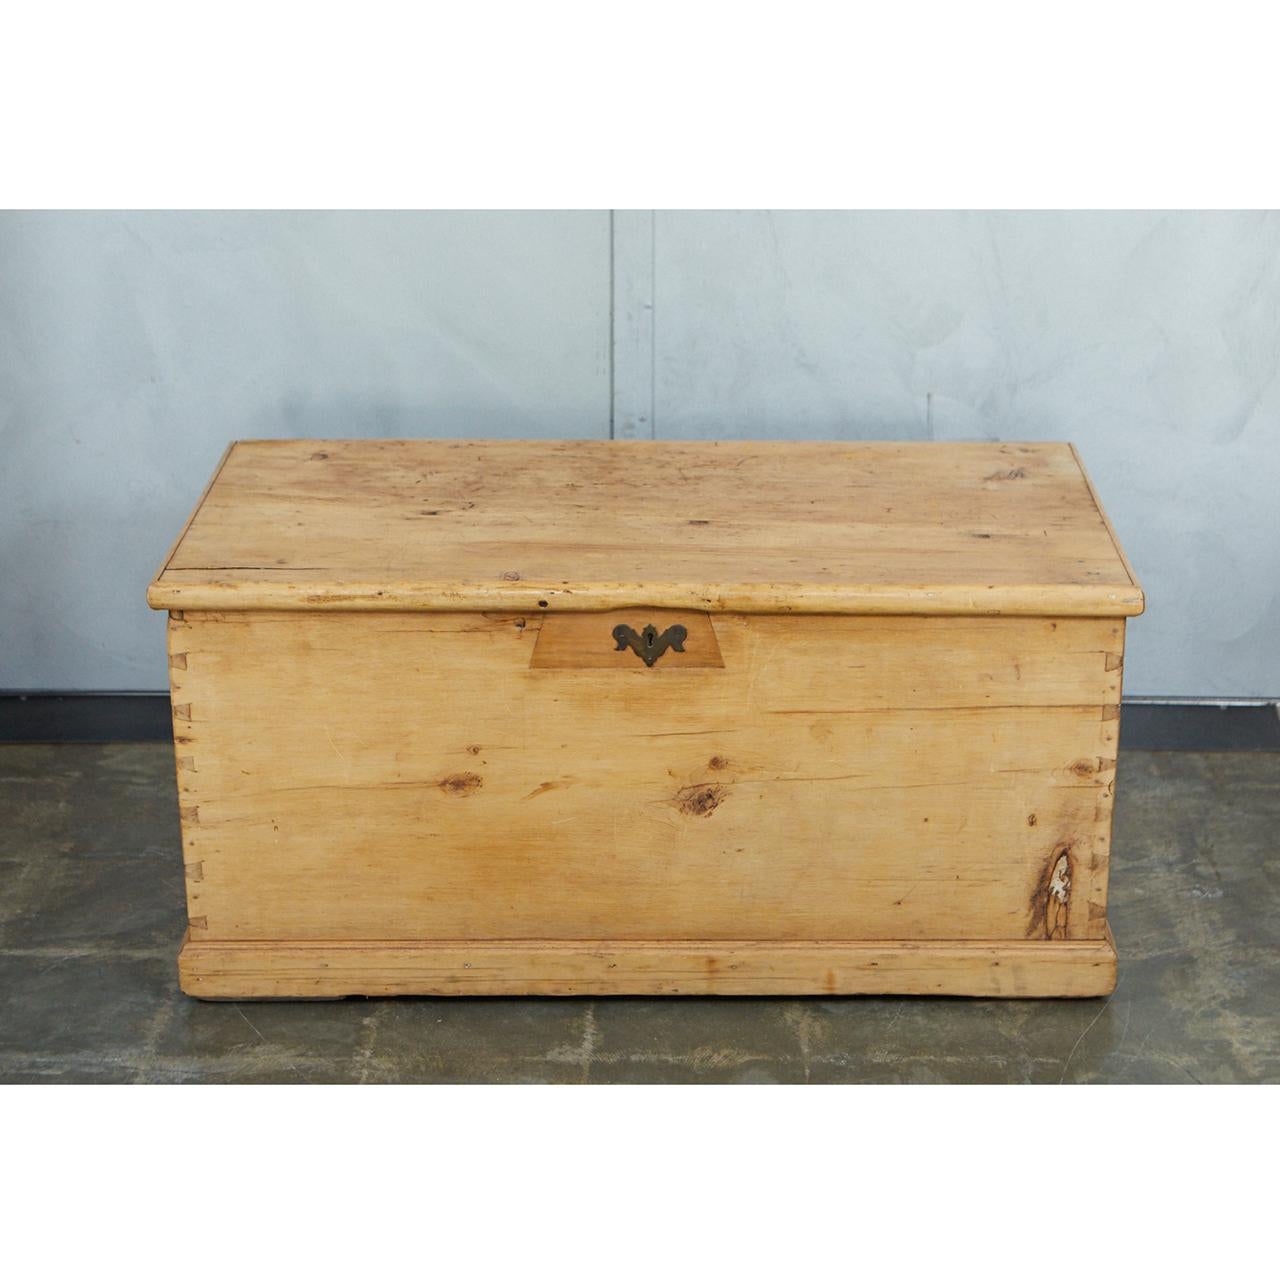 This handsome 19th century English pine trunk has an interior till with two drawers. The trunk has metal escutcheons and handles. The trunk is an attractive piece with quality craftsmanship. 

England, circa 19th century.

19” H X 40